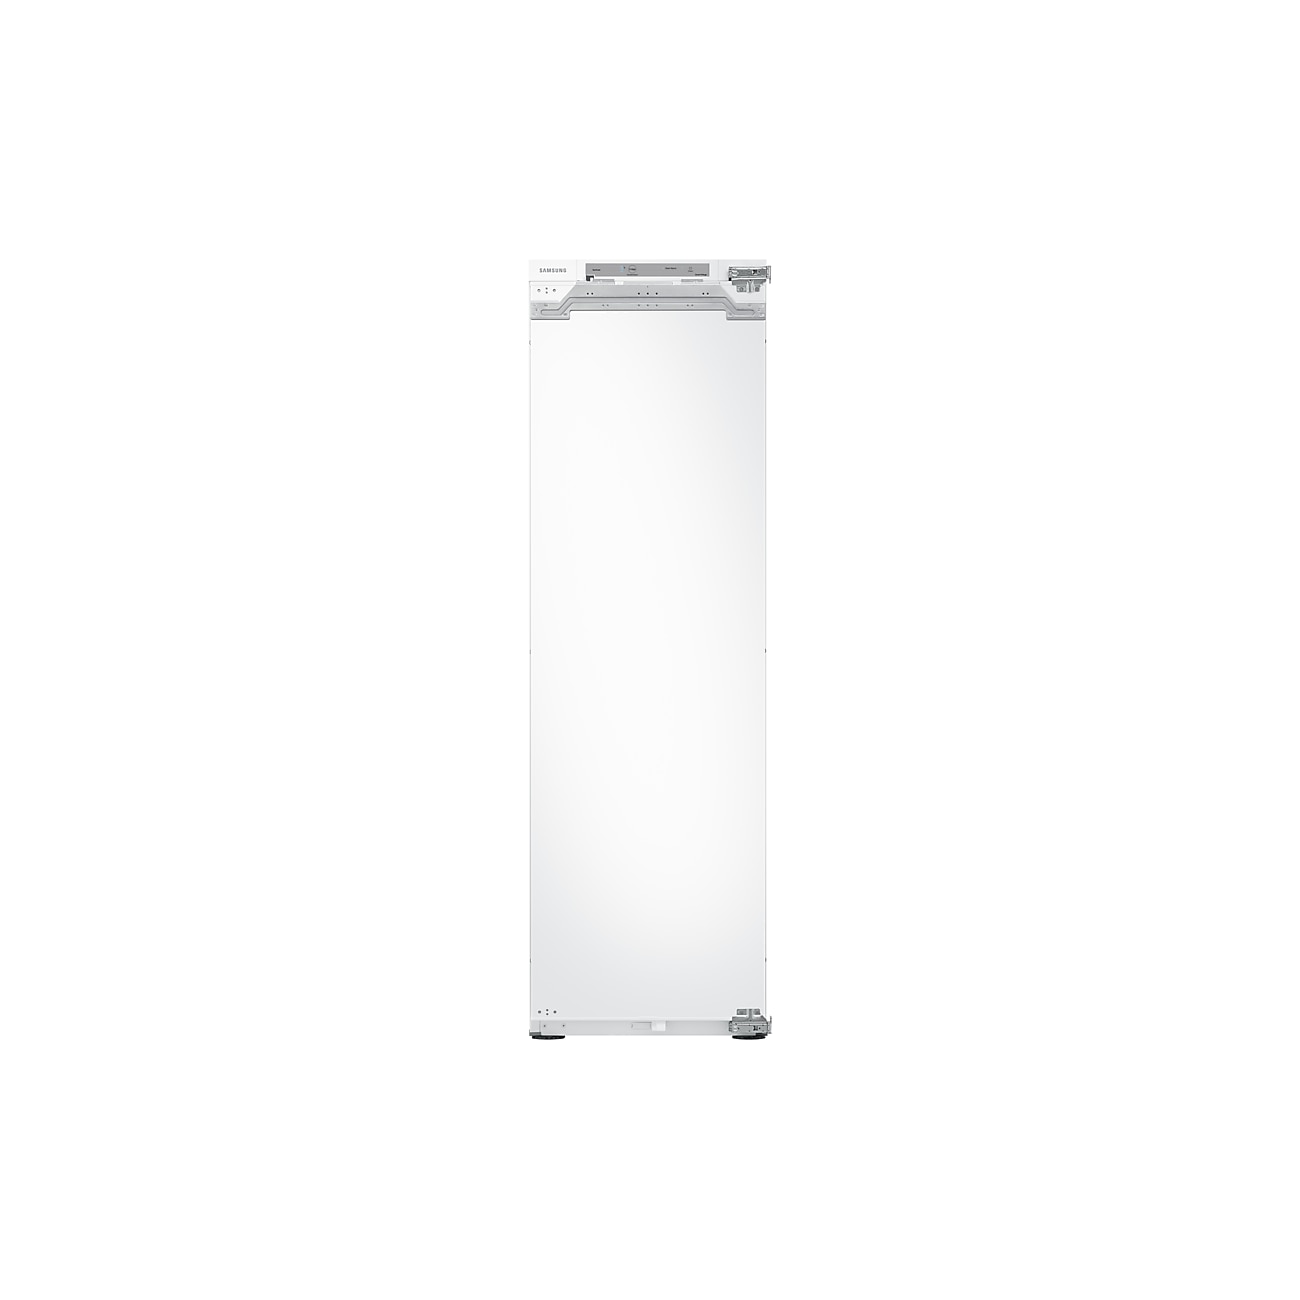 Samsung BRR29723EWW/EU Integrated One Door Fridge with SpaceMax™ Technology - White